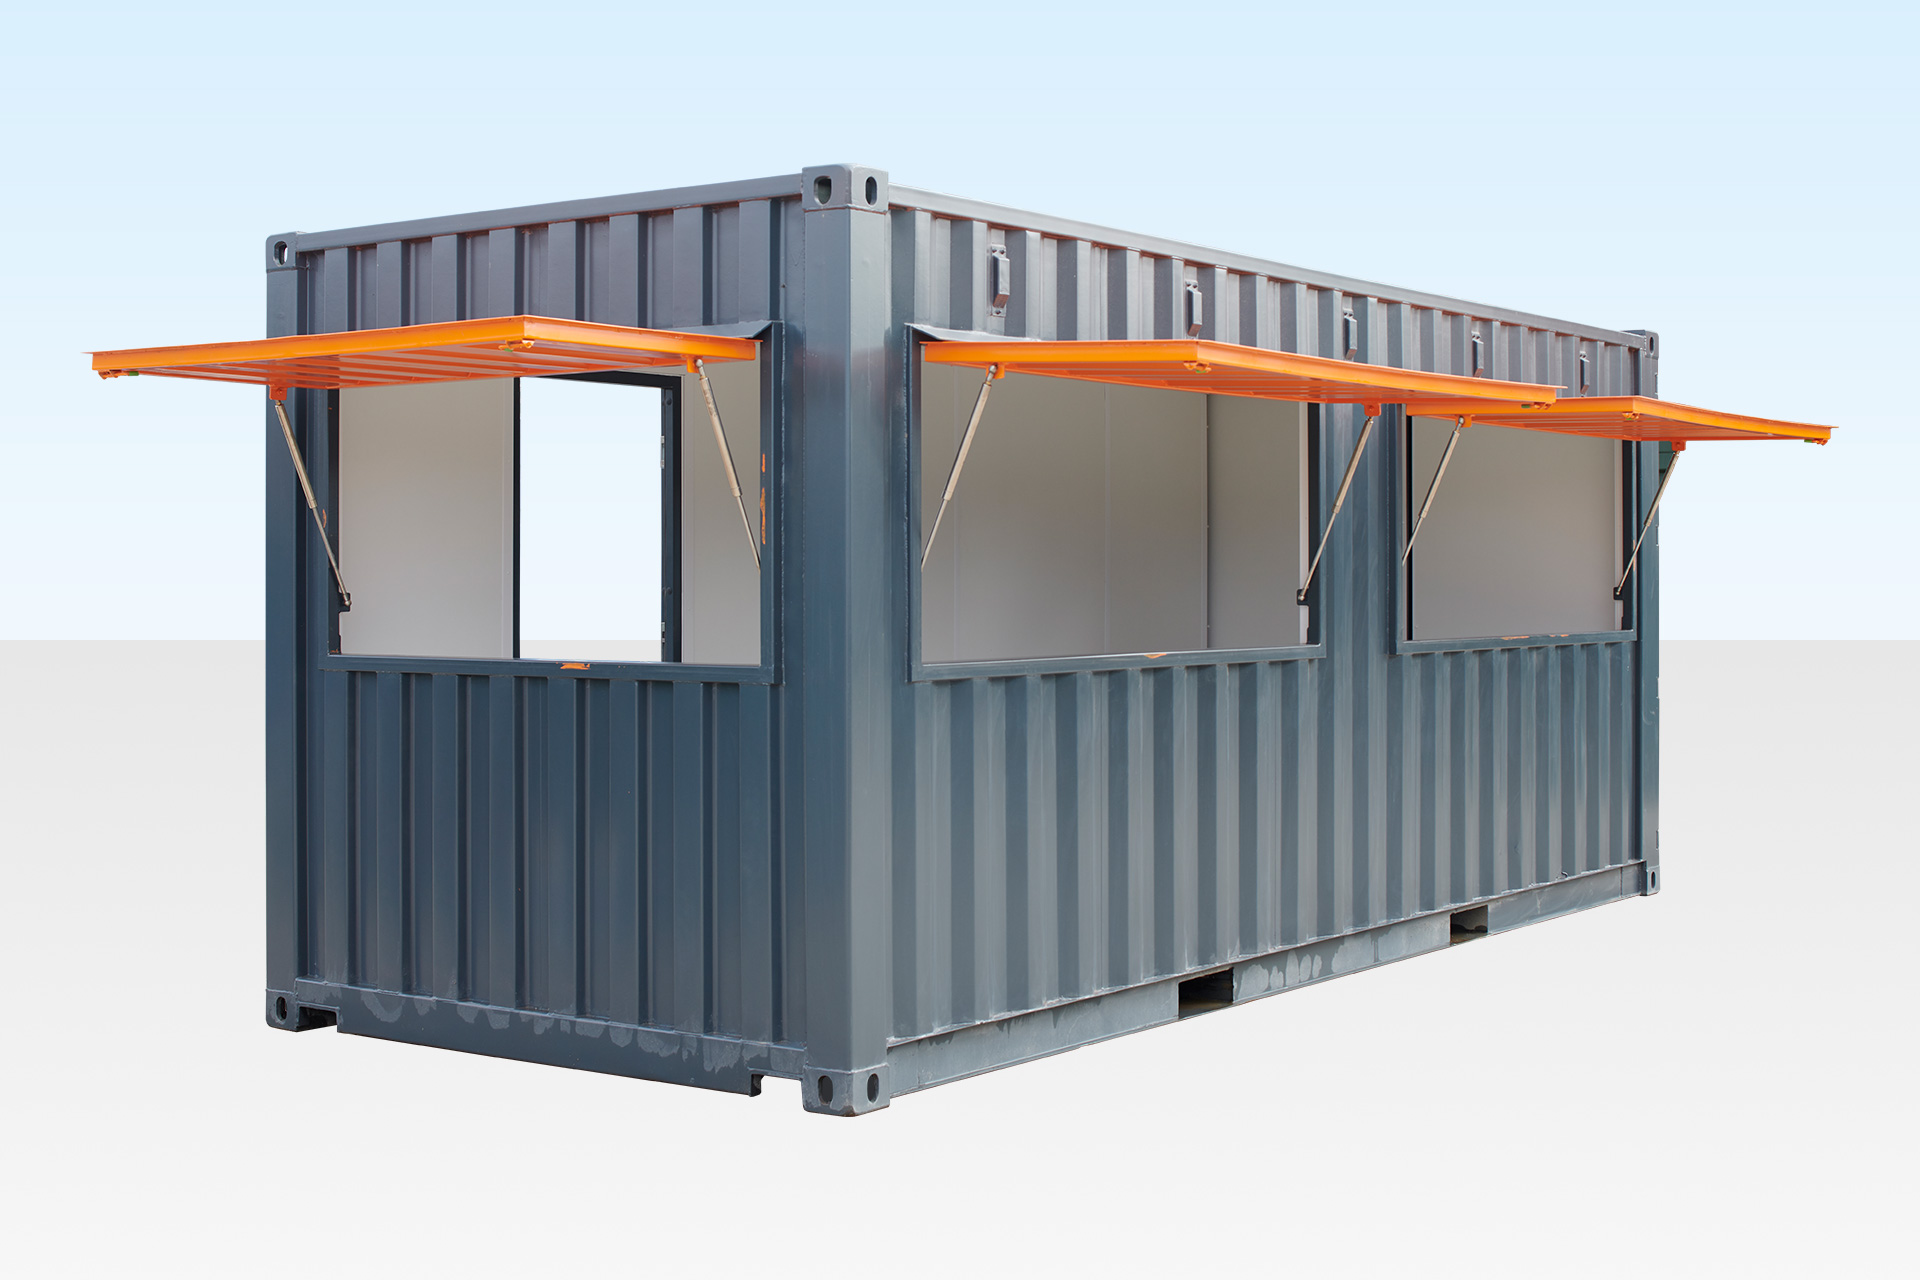 BUY SHIPPING CONTAINER CAFE AT WWW.HELLOCONTAINERS.COM